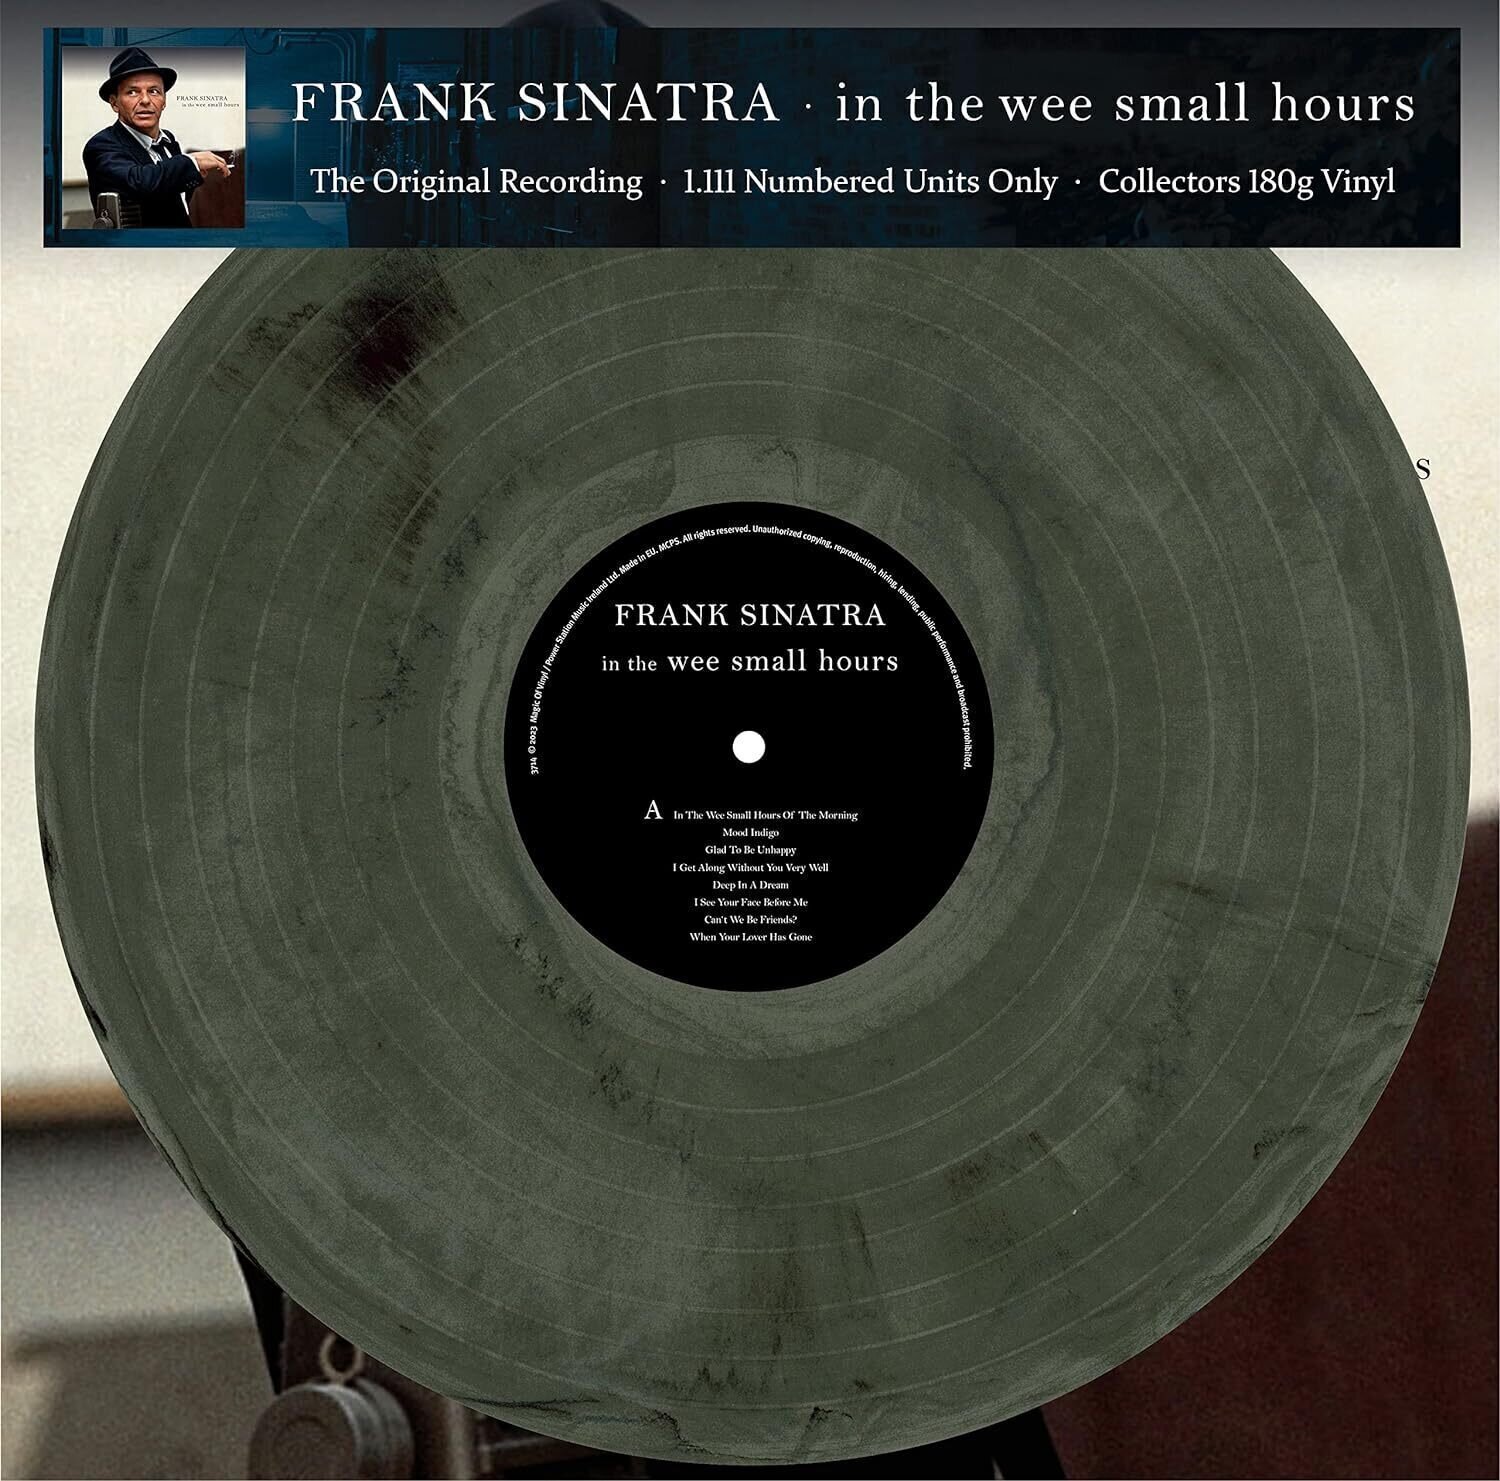 Frank Sinatra - In The Wee Small Hours (Limited Edition) (Numbered) (Grey/Black Marbled Coloured) (LP) Frank Sinatra